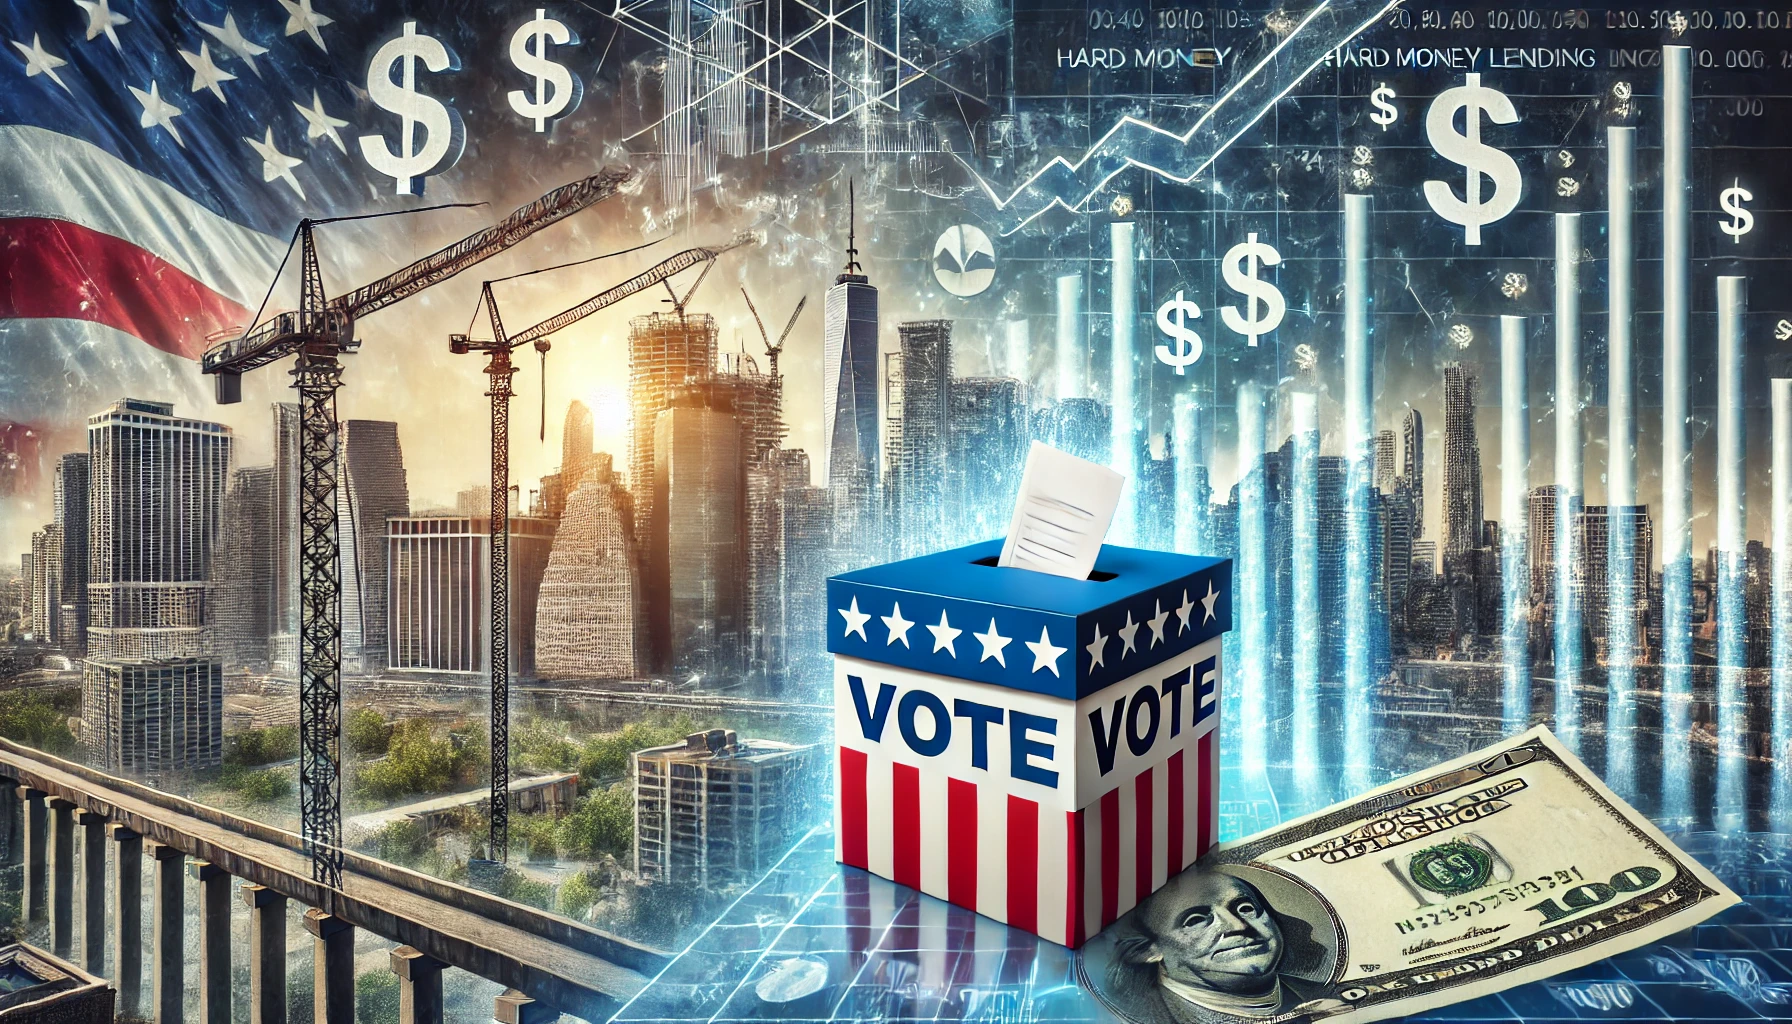 How the Upcoming Election Can Impact the Hard Money Lending Industry